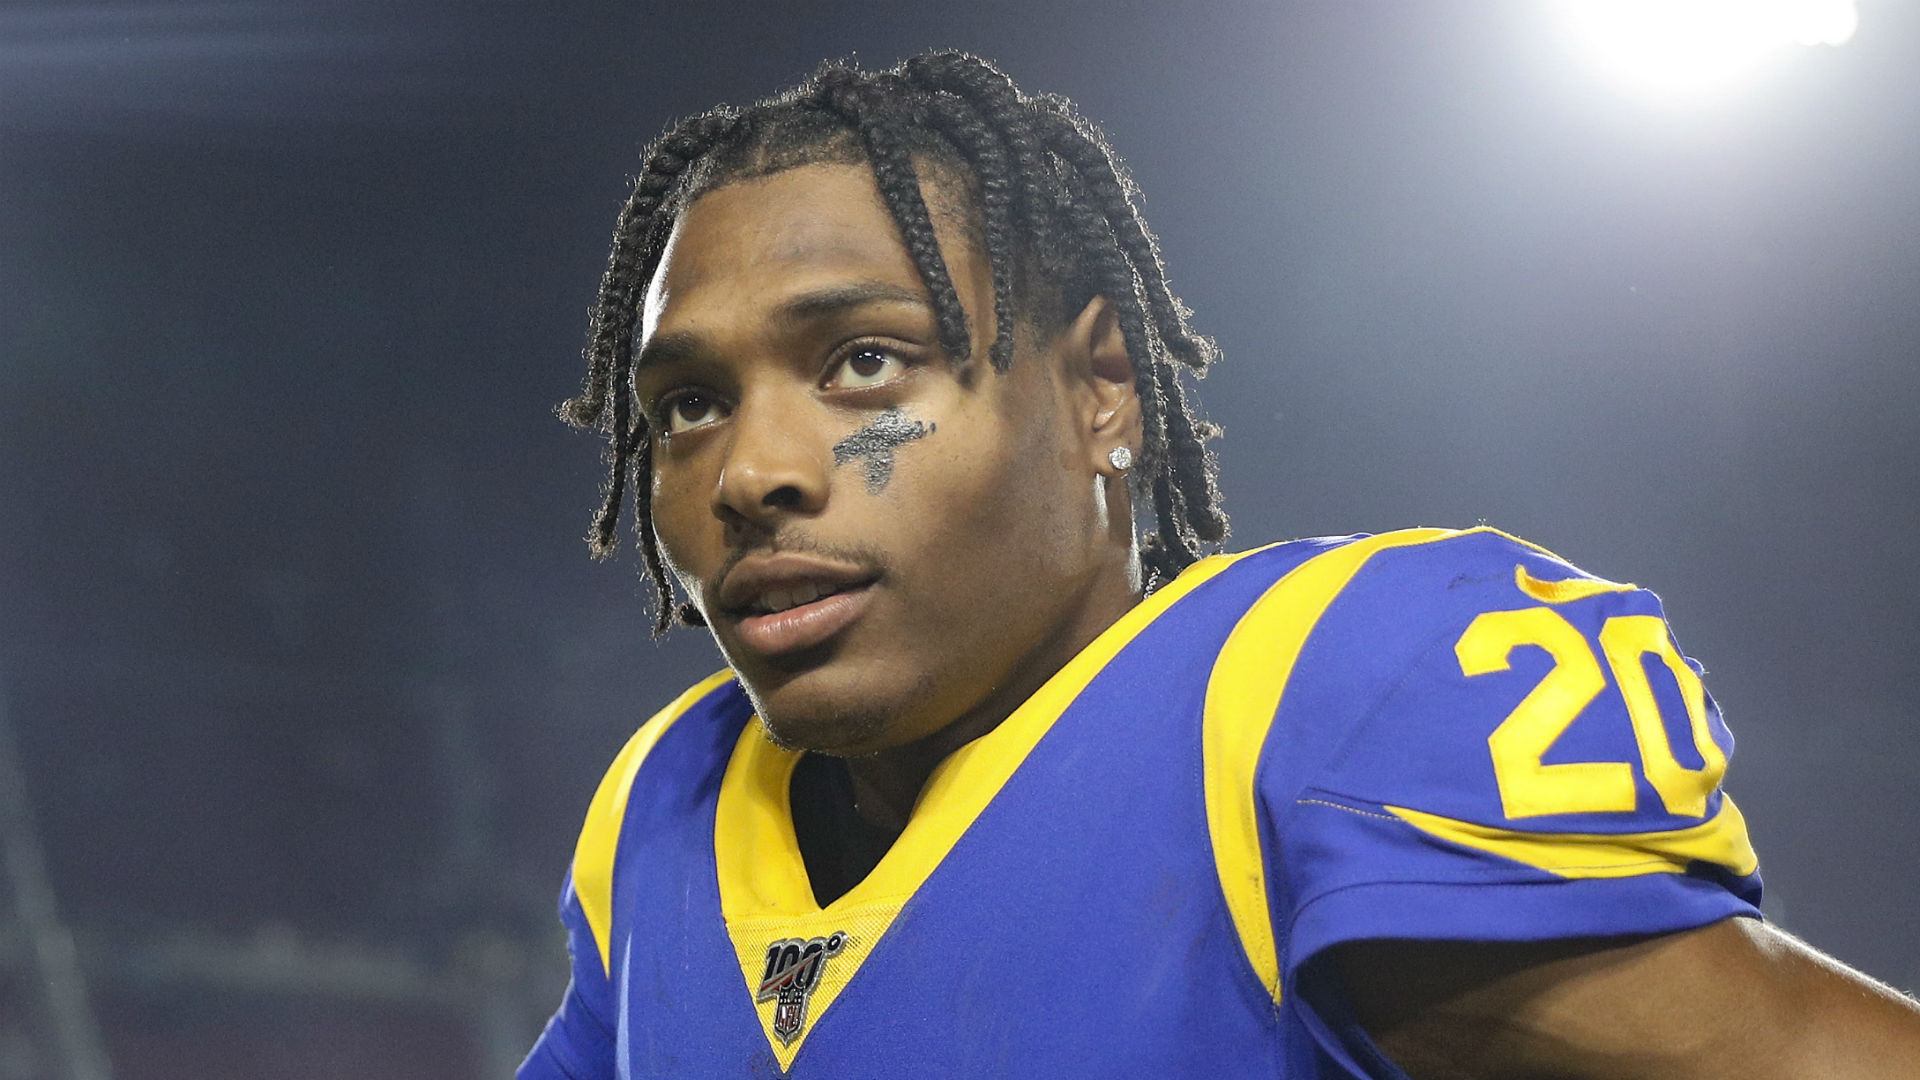 Repeated questions about Jalen Ramsey's contract situation frustrated the Los Angeles Rams cornerback.